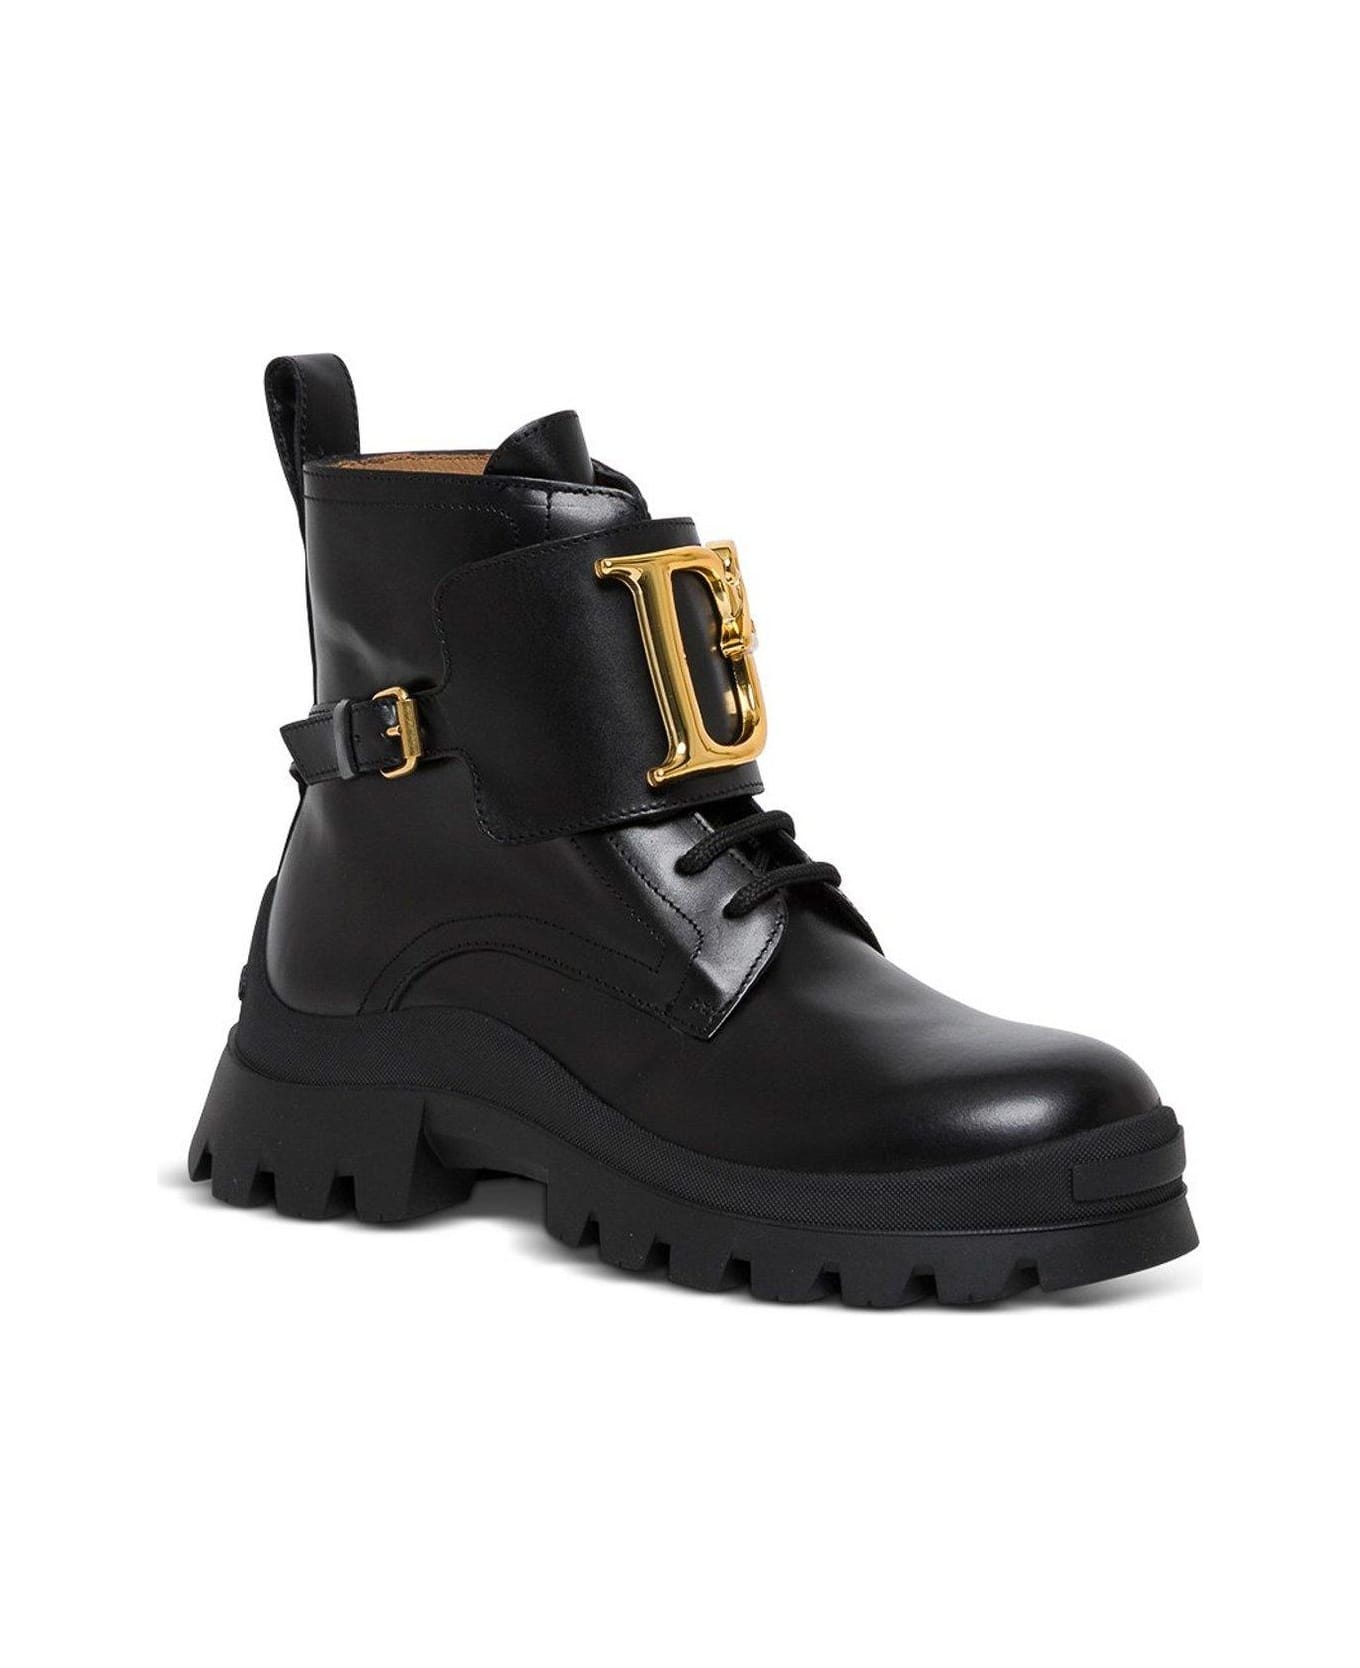 Dsquared2 D2 Statement Lace-up Boots - Nero ブーツ